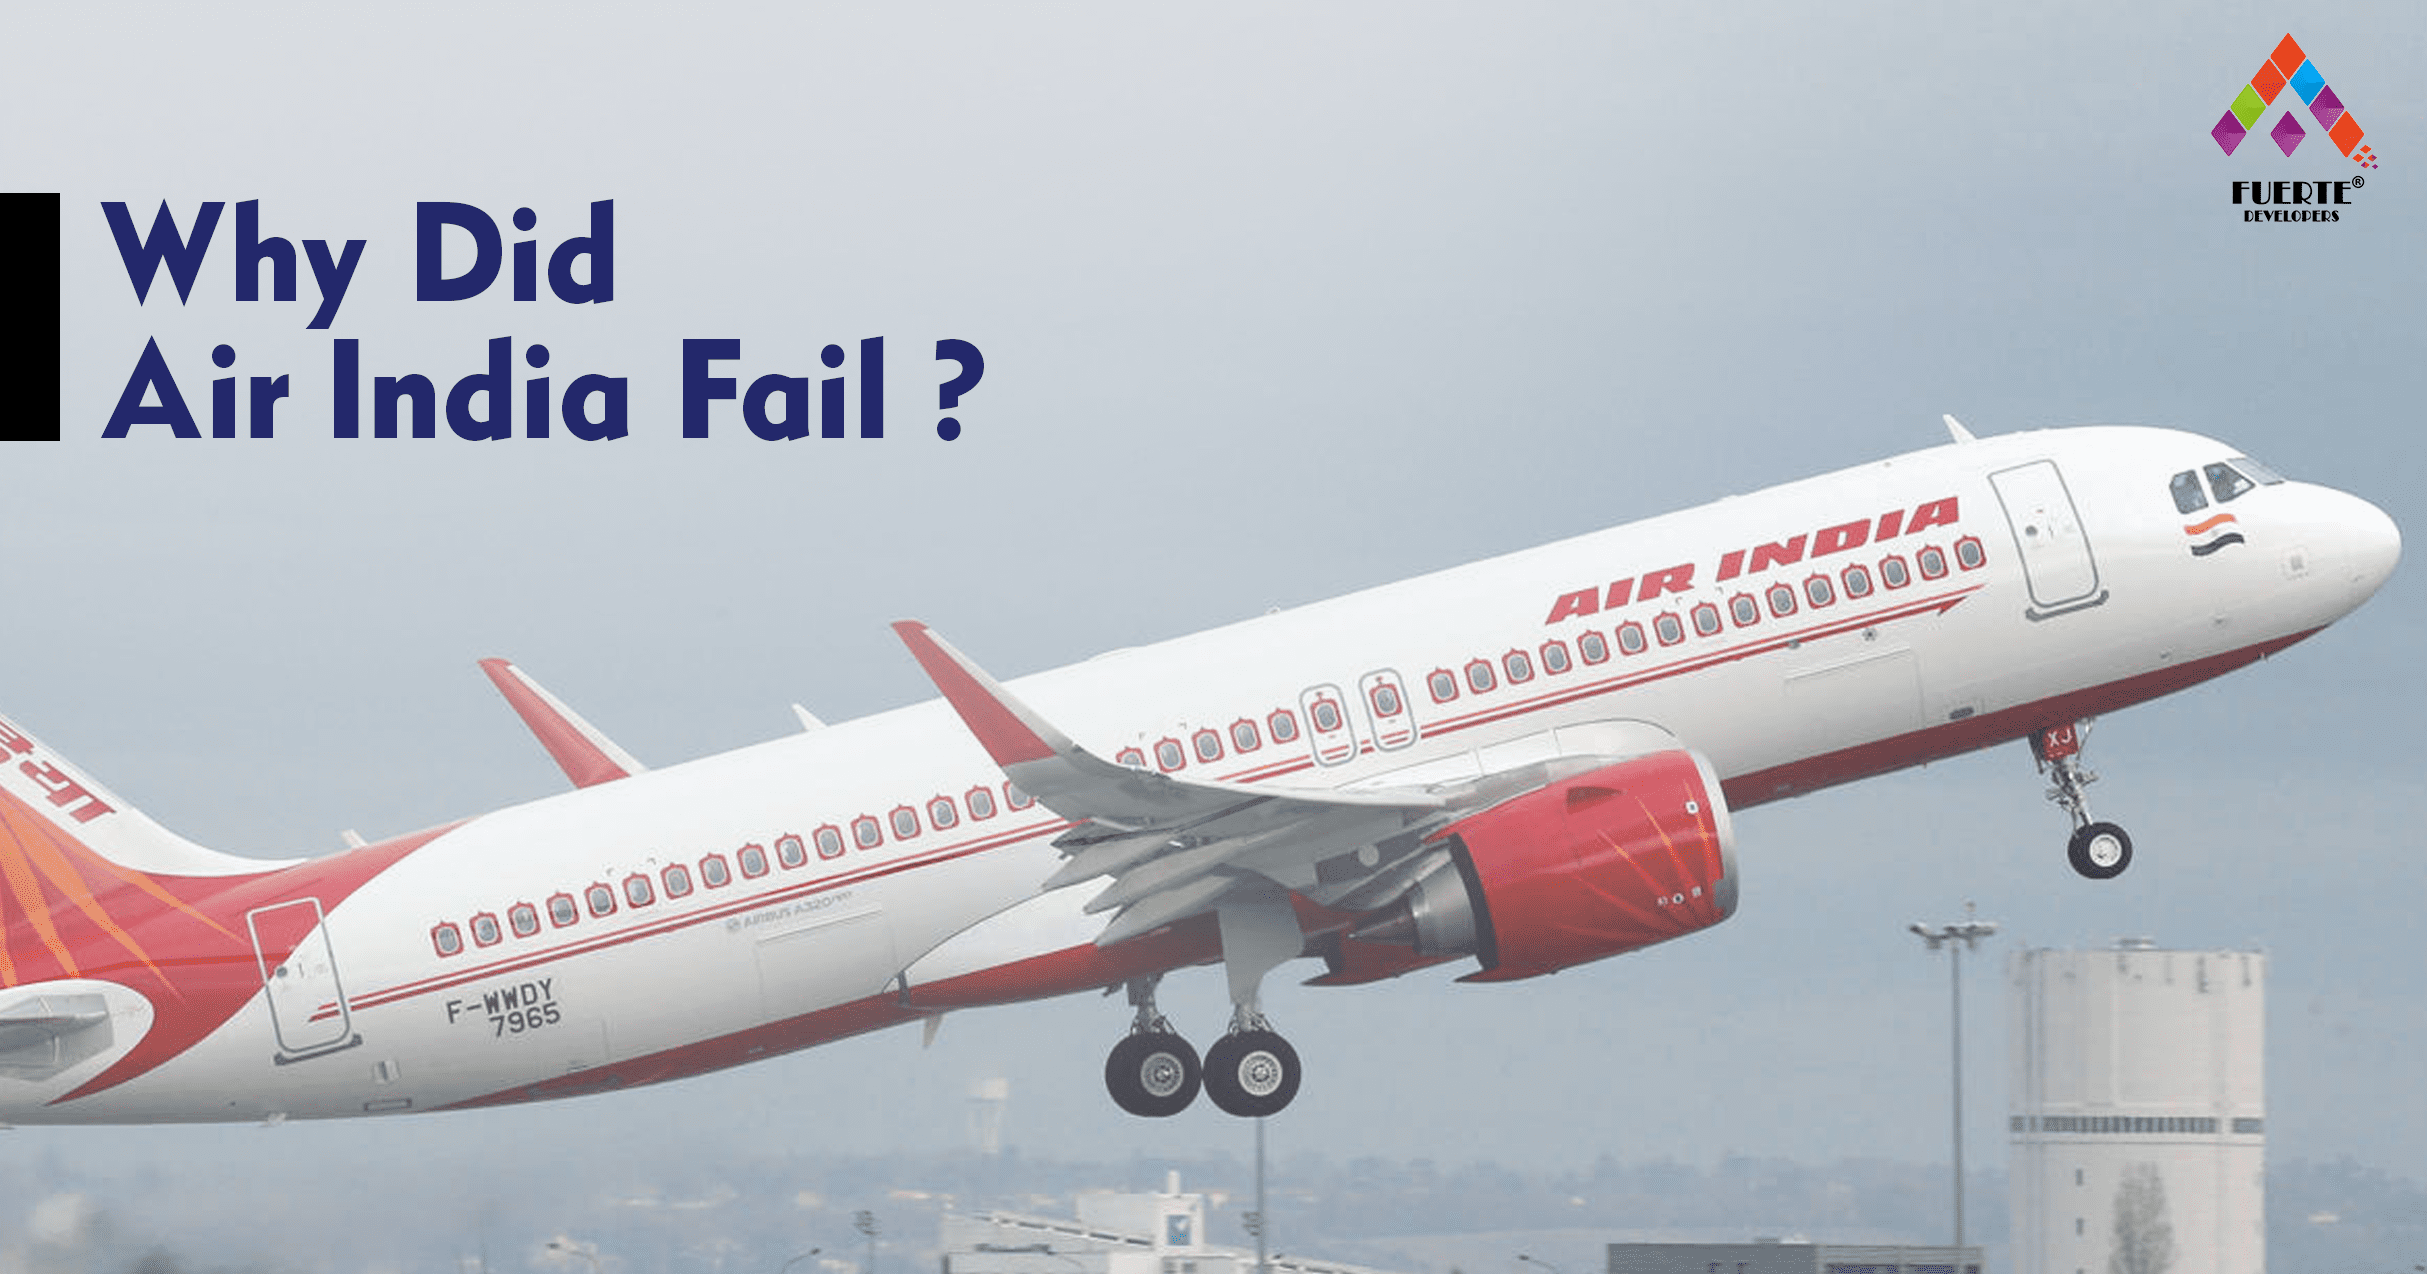 You are currently viewing why did Air India fail?